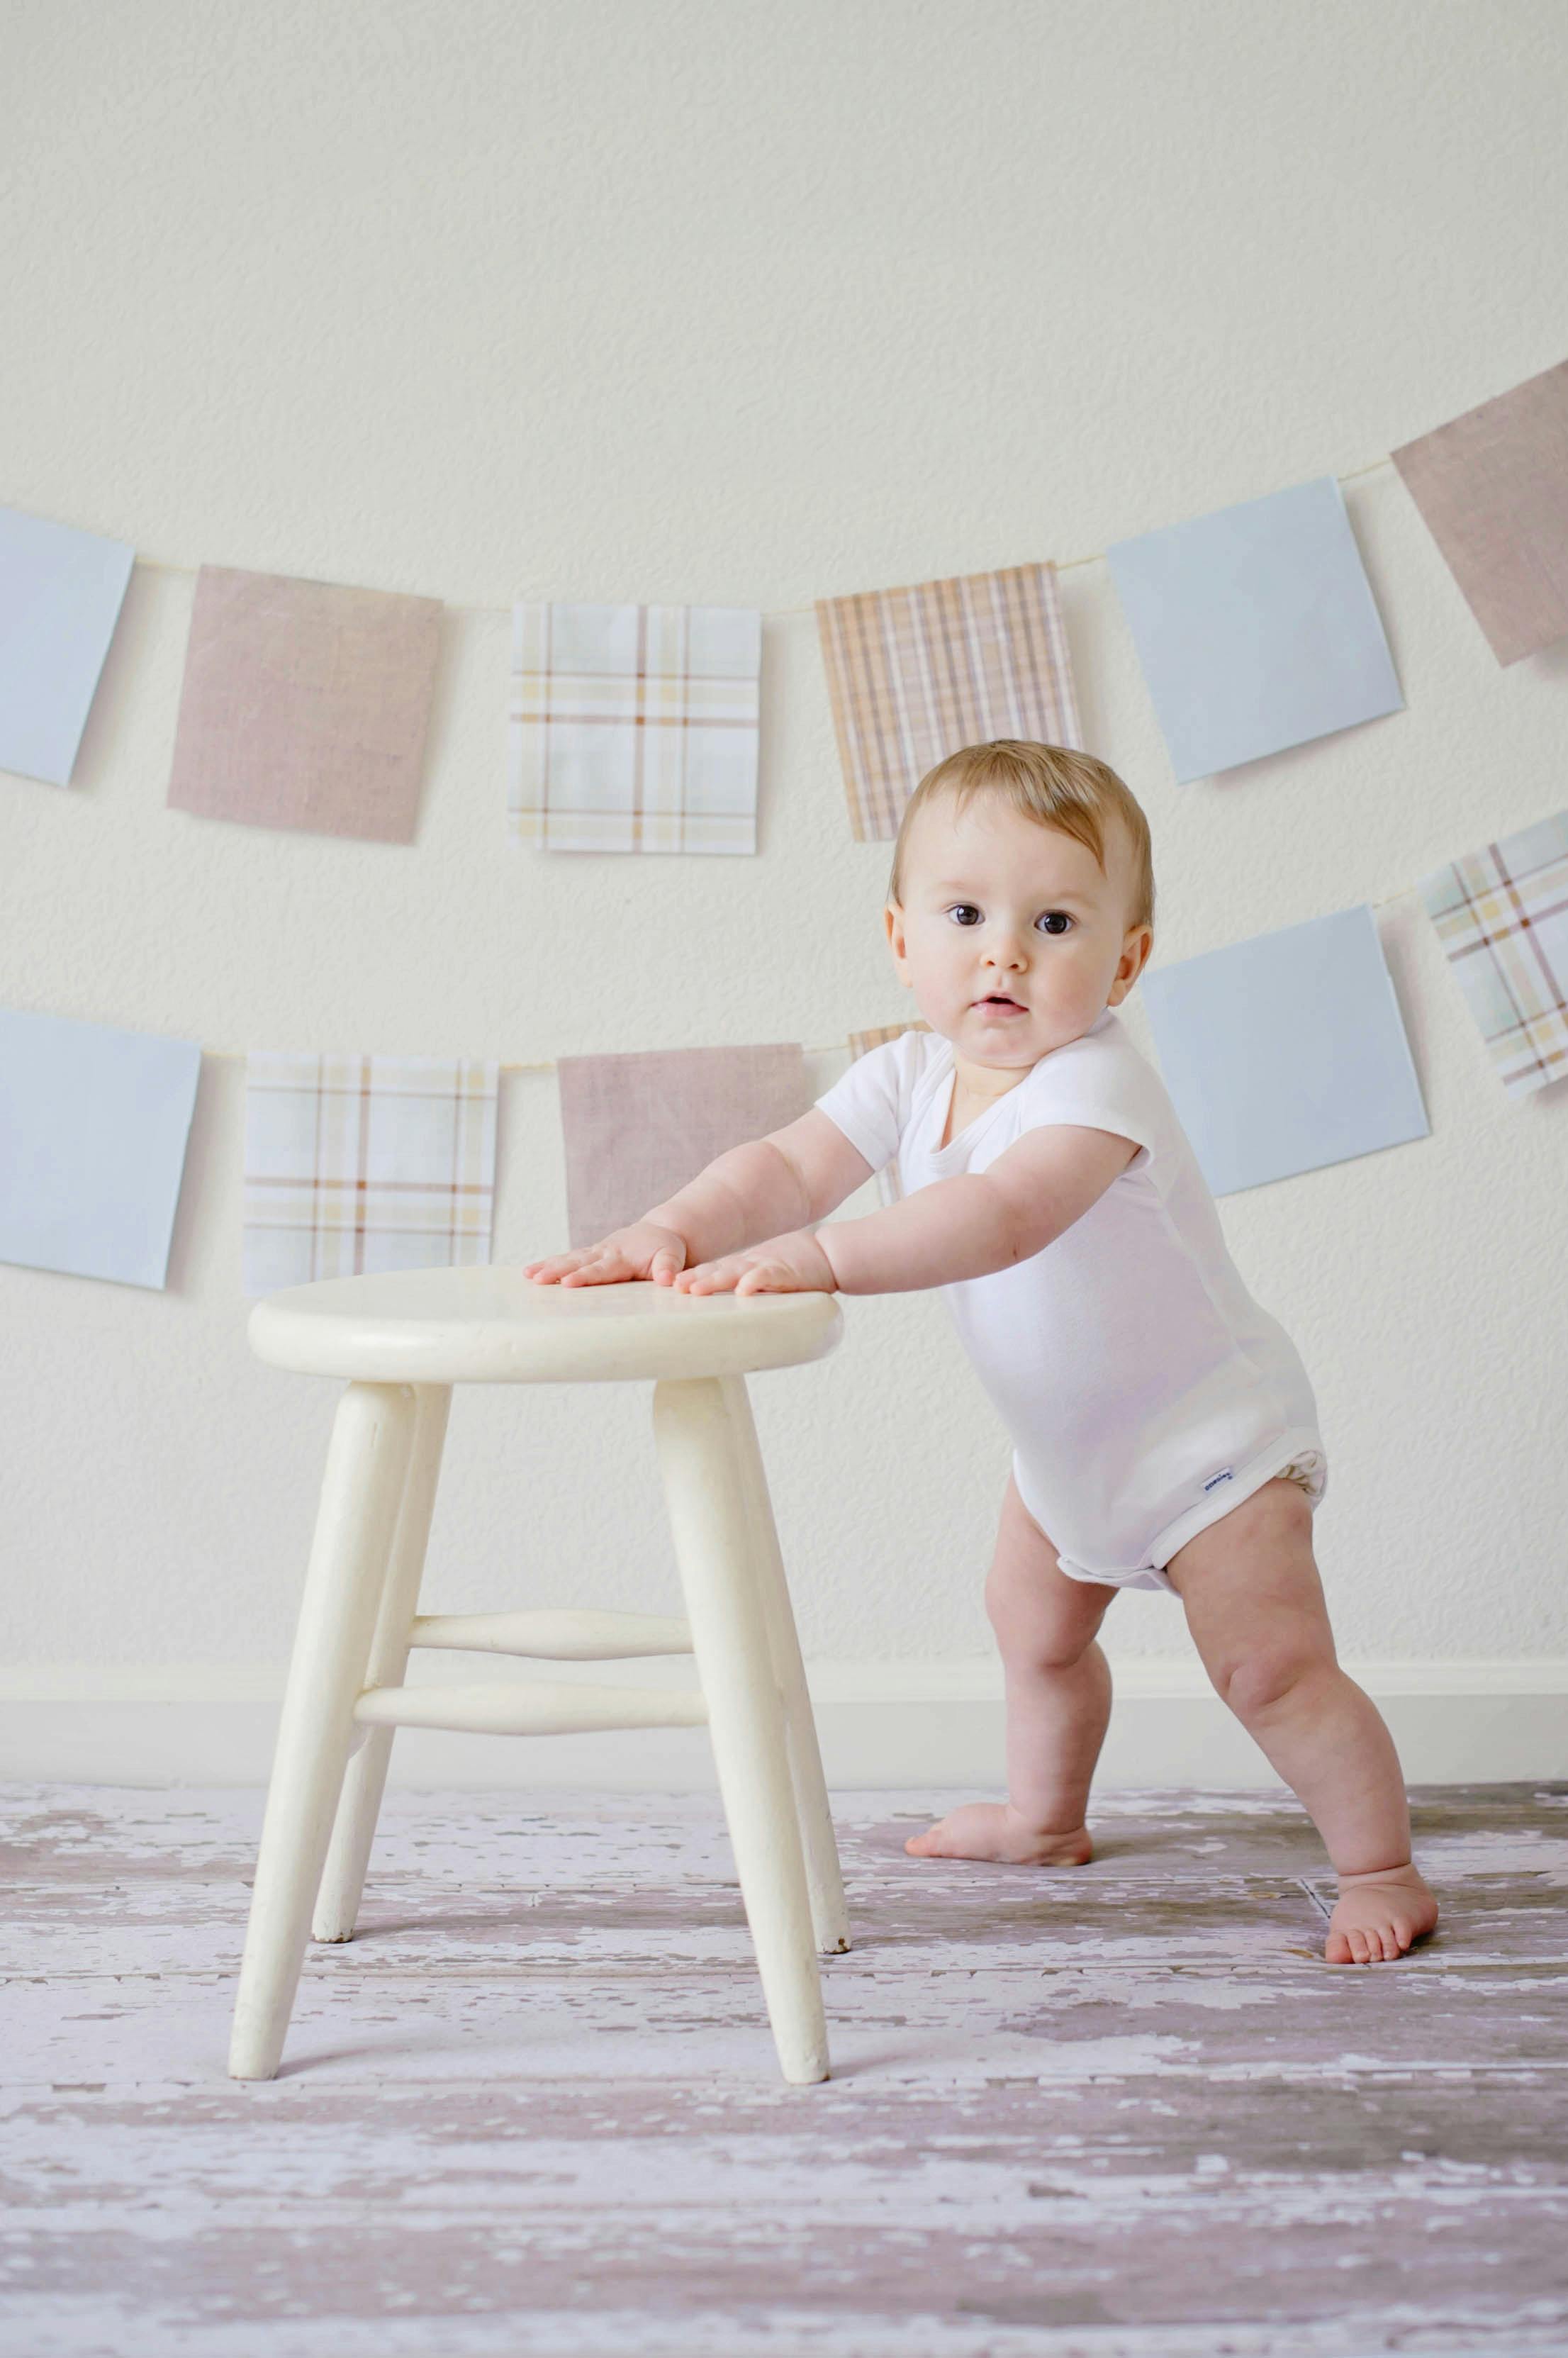 A baby learning to stand with the help of a stool | Source: Pexels